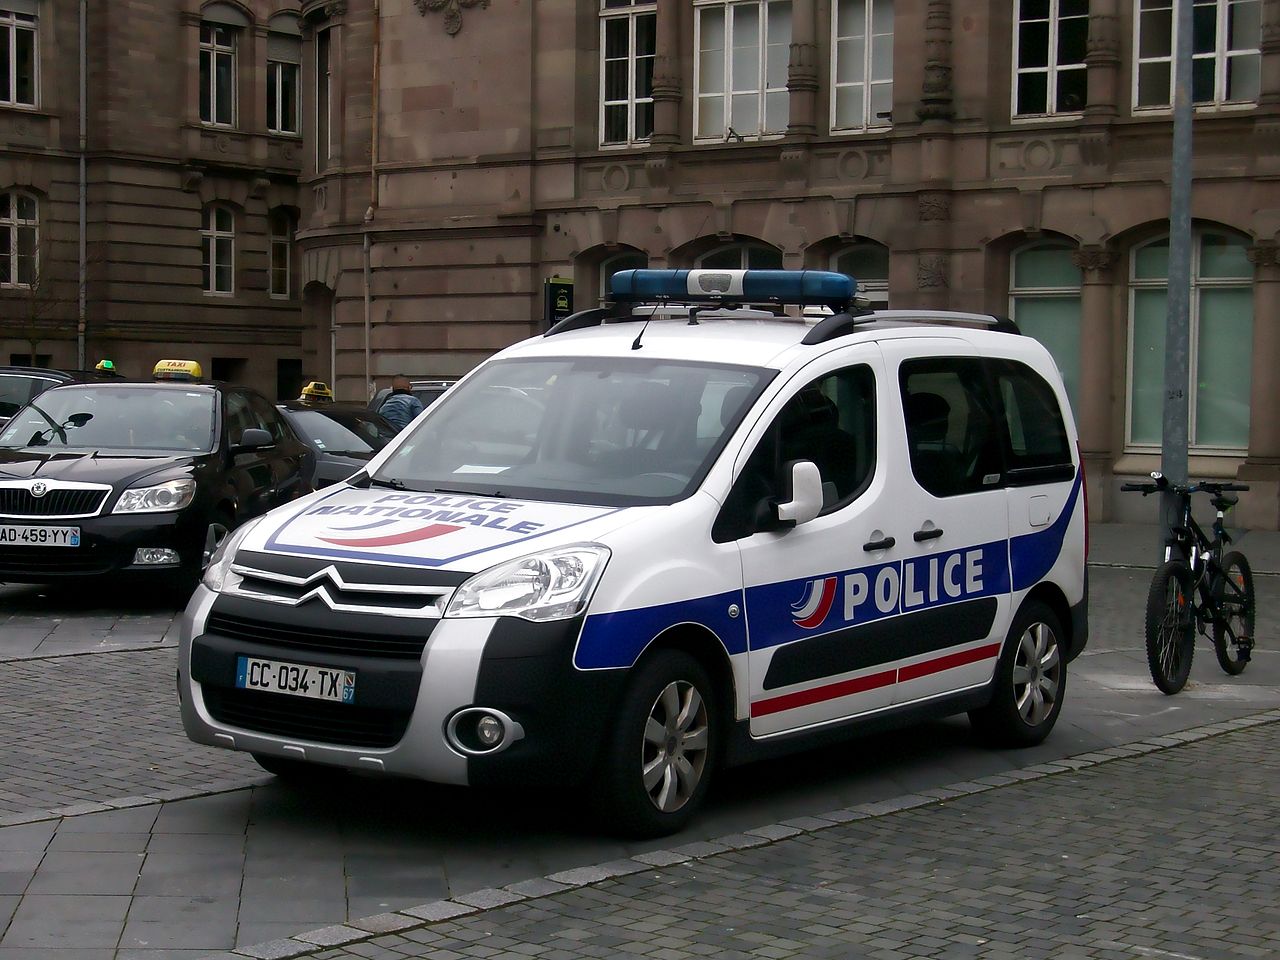 Controle Police Attestation Deplacement Couvre Feu